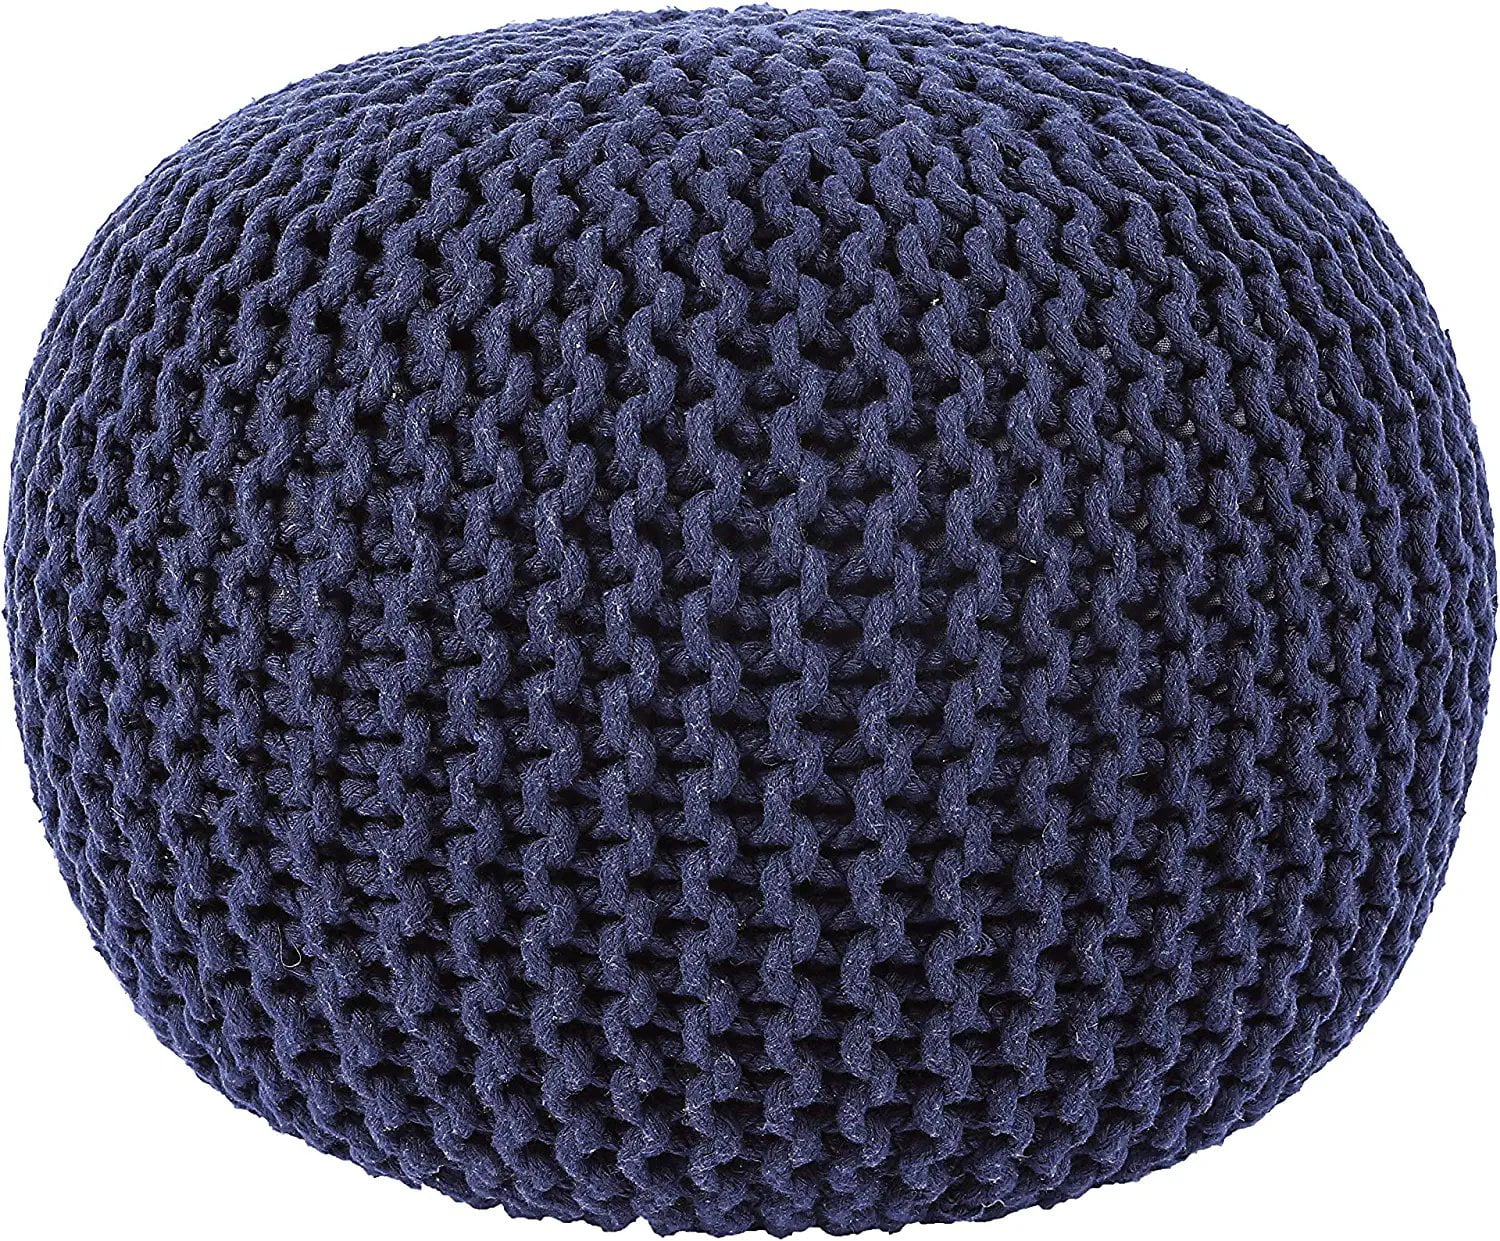 REDEARTH Round Pouf Foot Stool Bean Bag Ottoman - Cable Knitted Cord ...